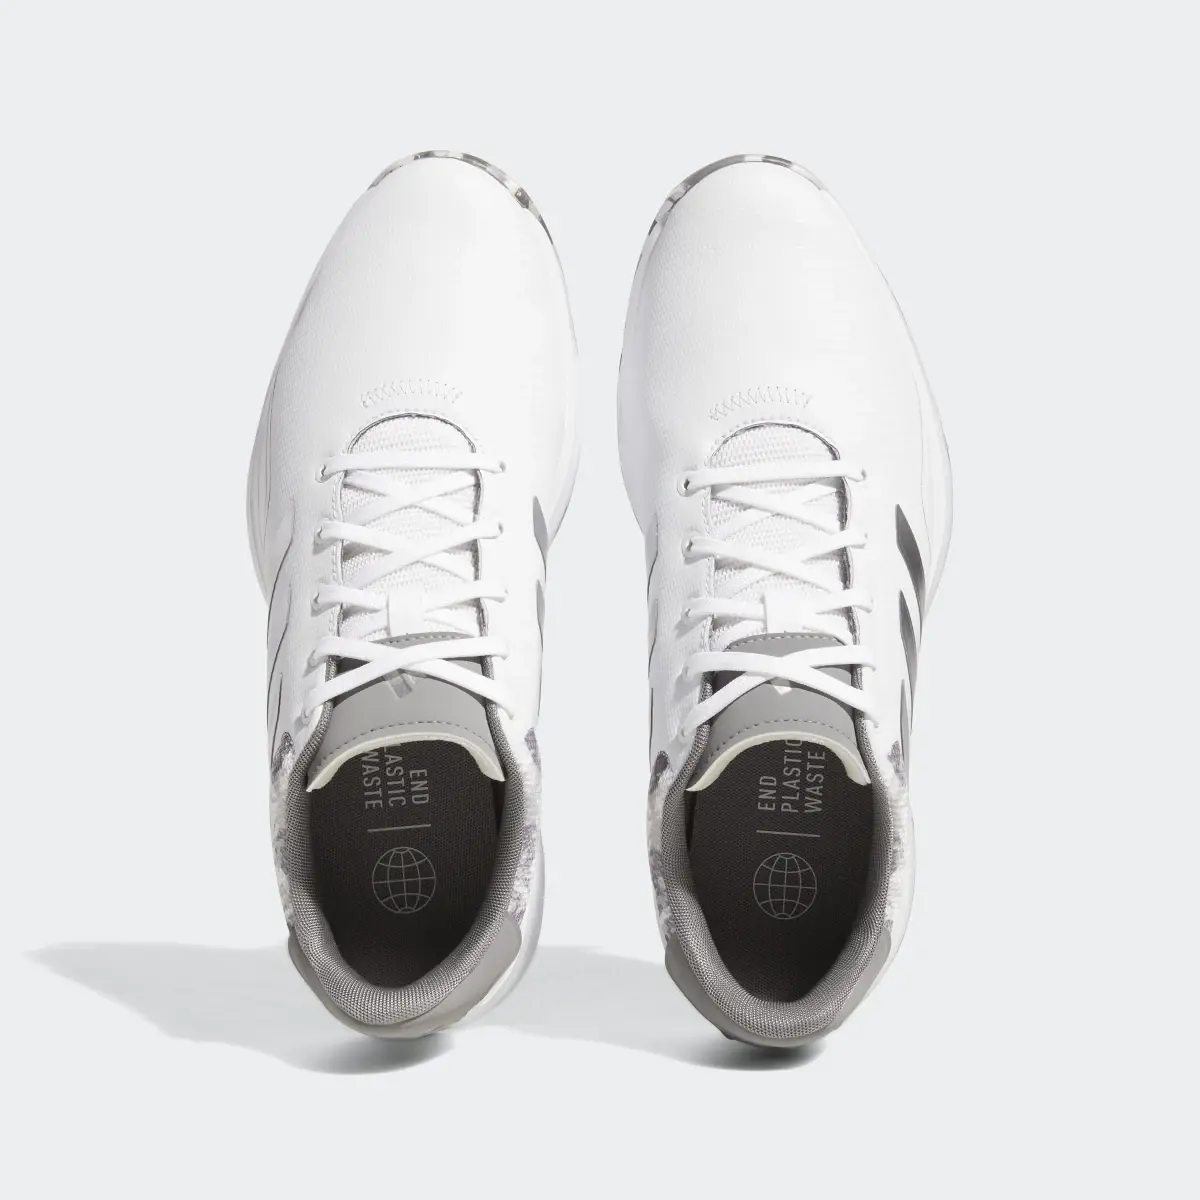 Adidas S2G Golf Shoes. 3